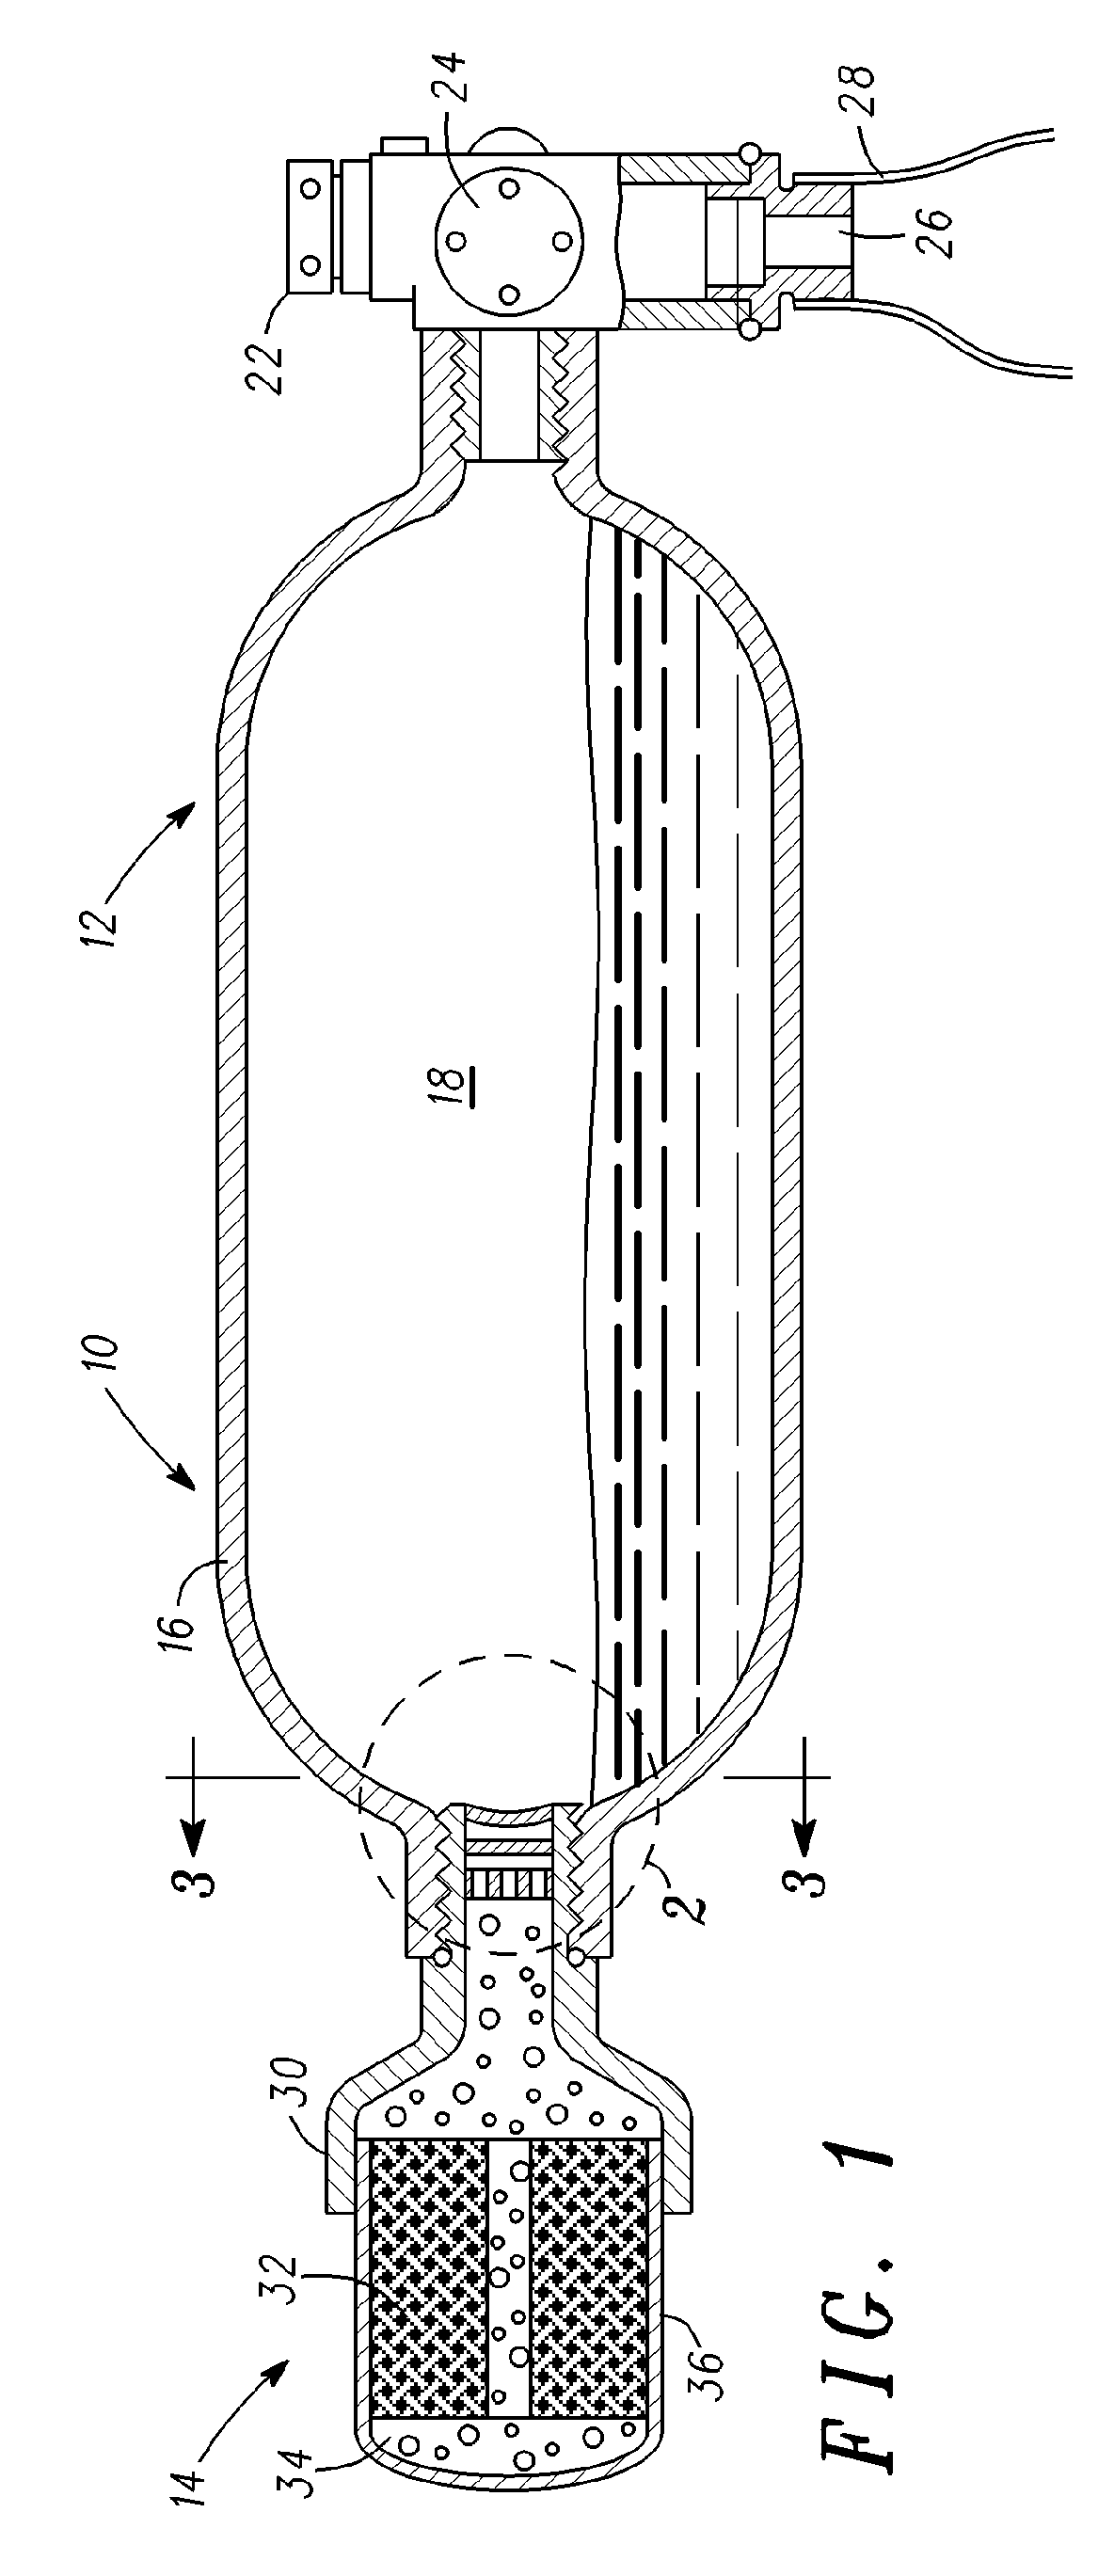 Hybrid inflator with temporary gas generator throttle